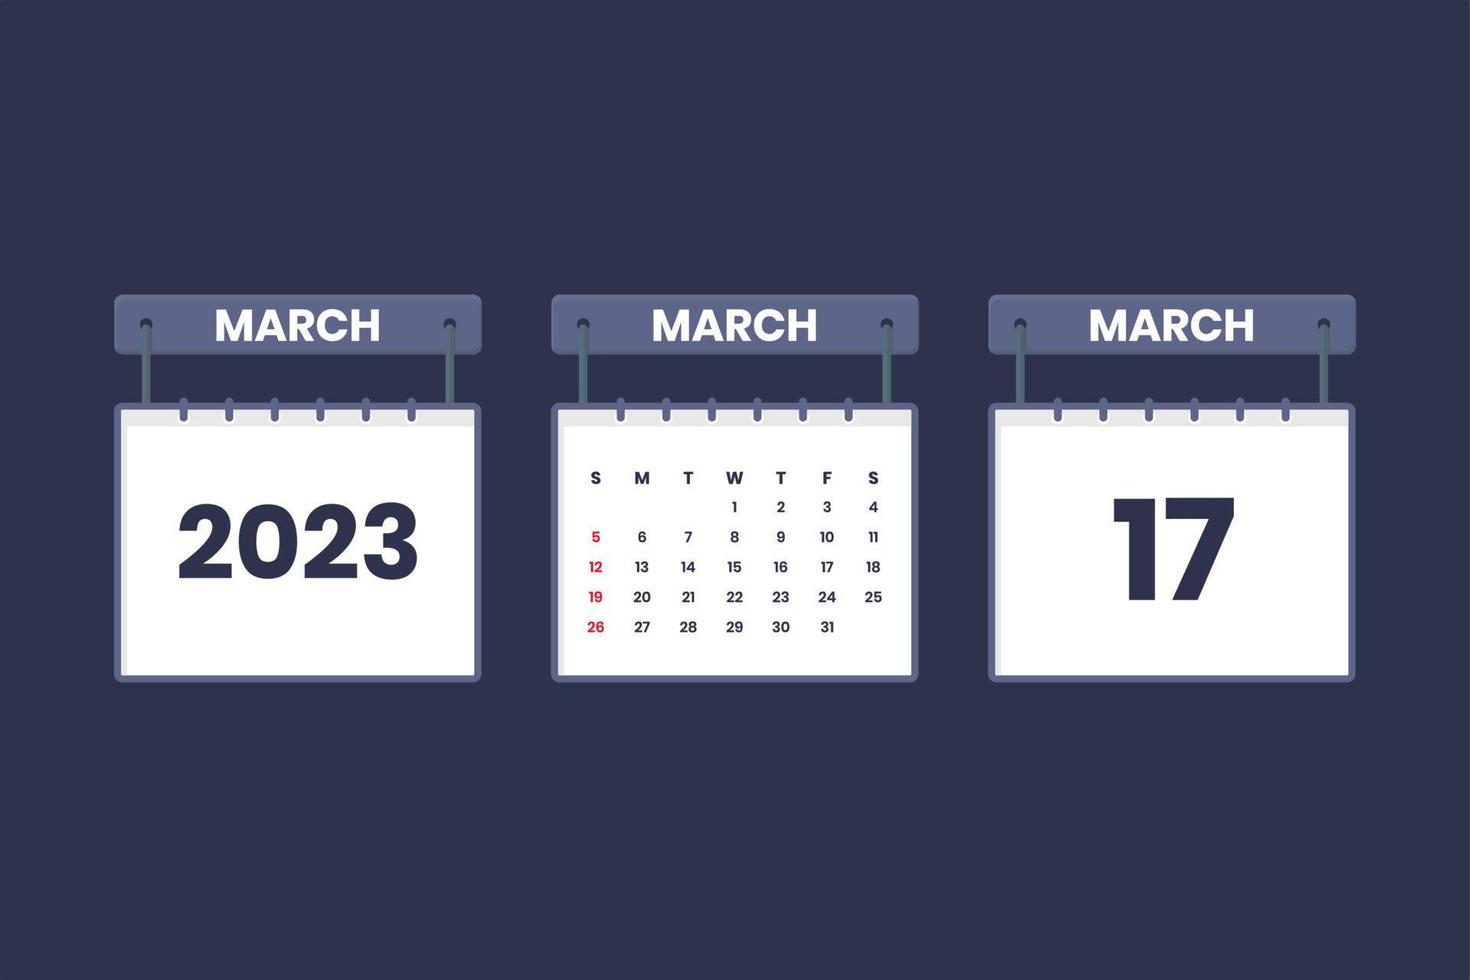 17 March 2023 calendar icon for schedule, appointment, important date concept vector